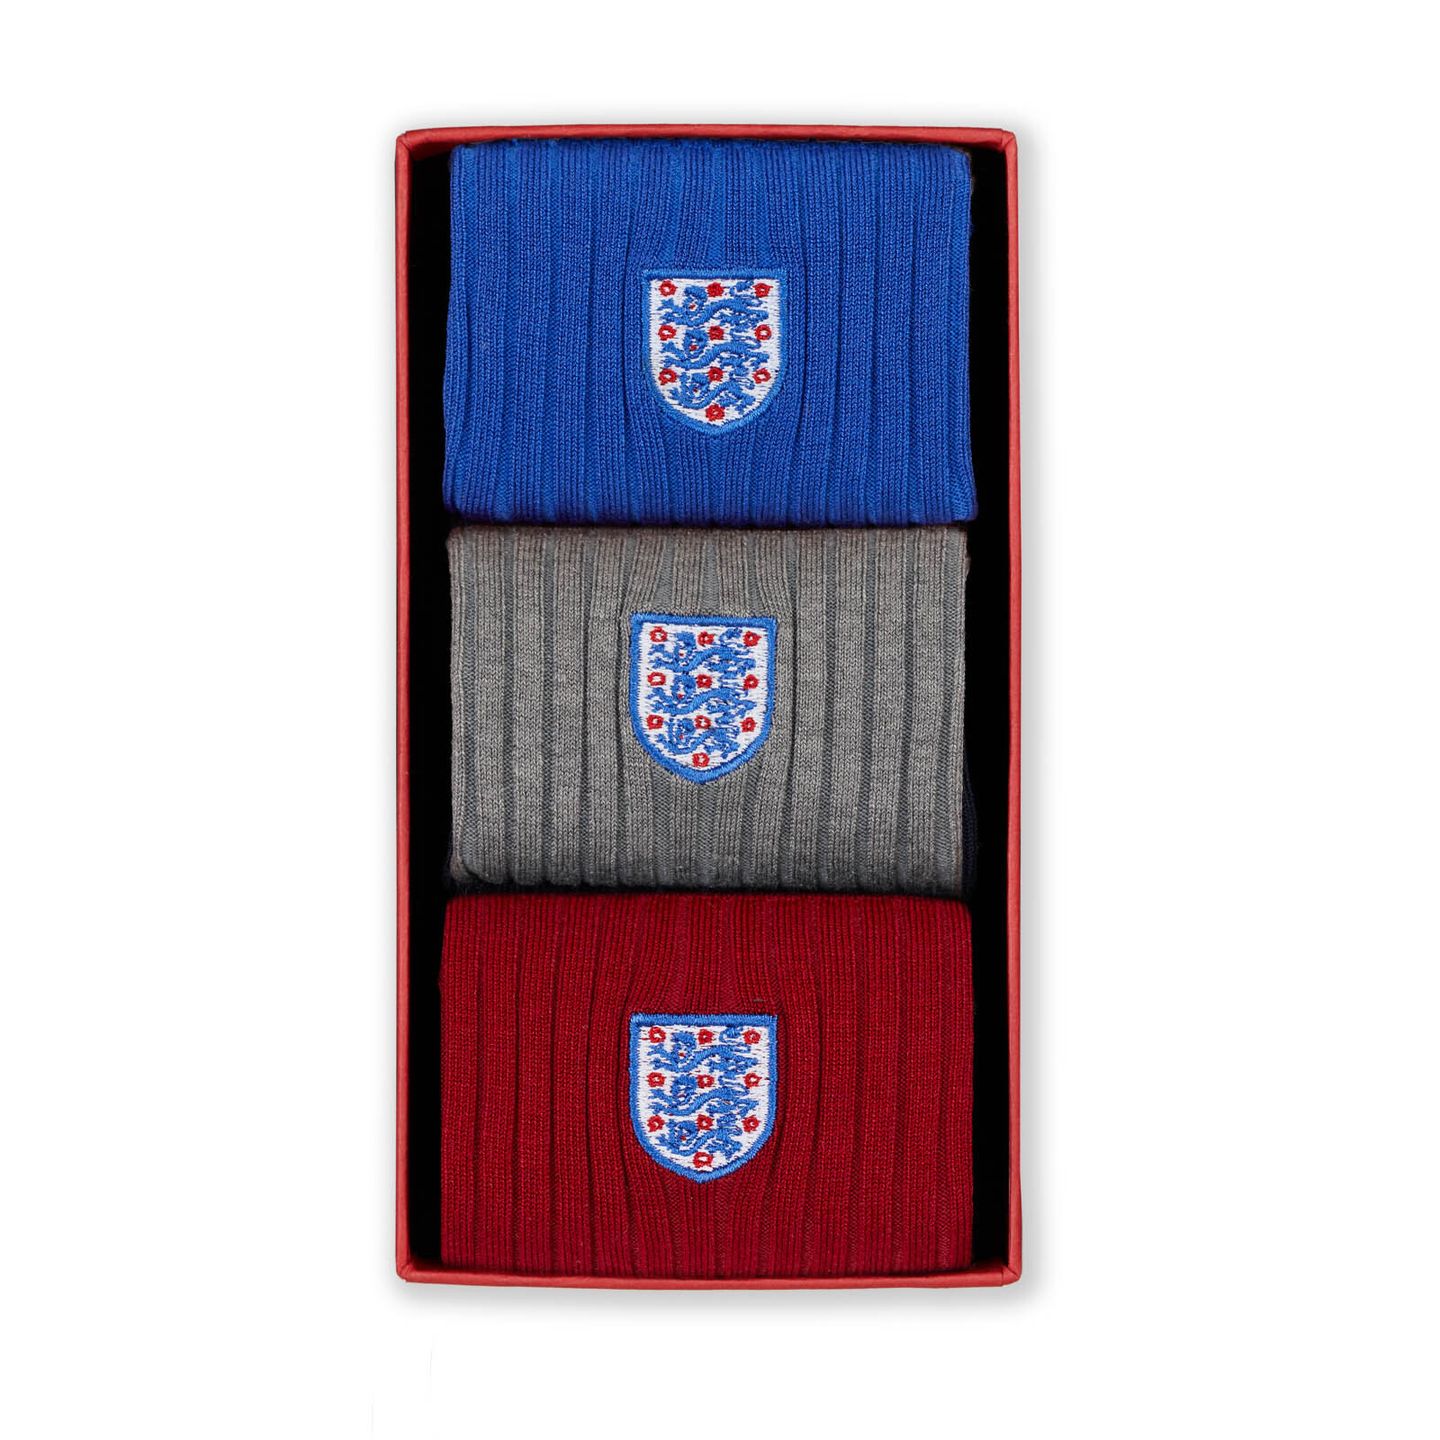 3 pair of England 3 Lion socks in blue, grey and red